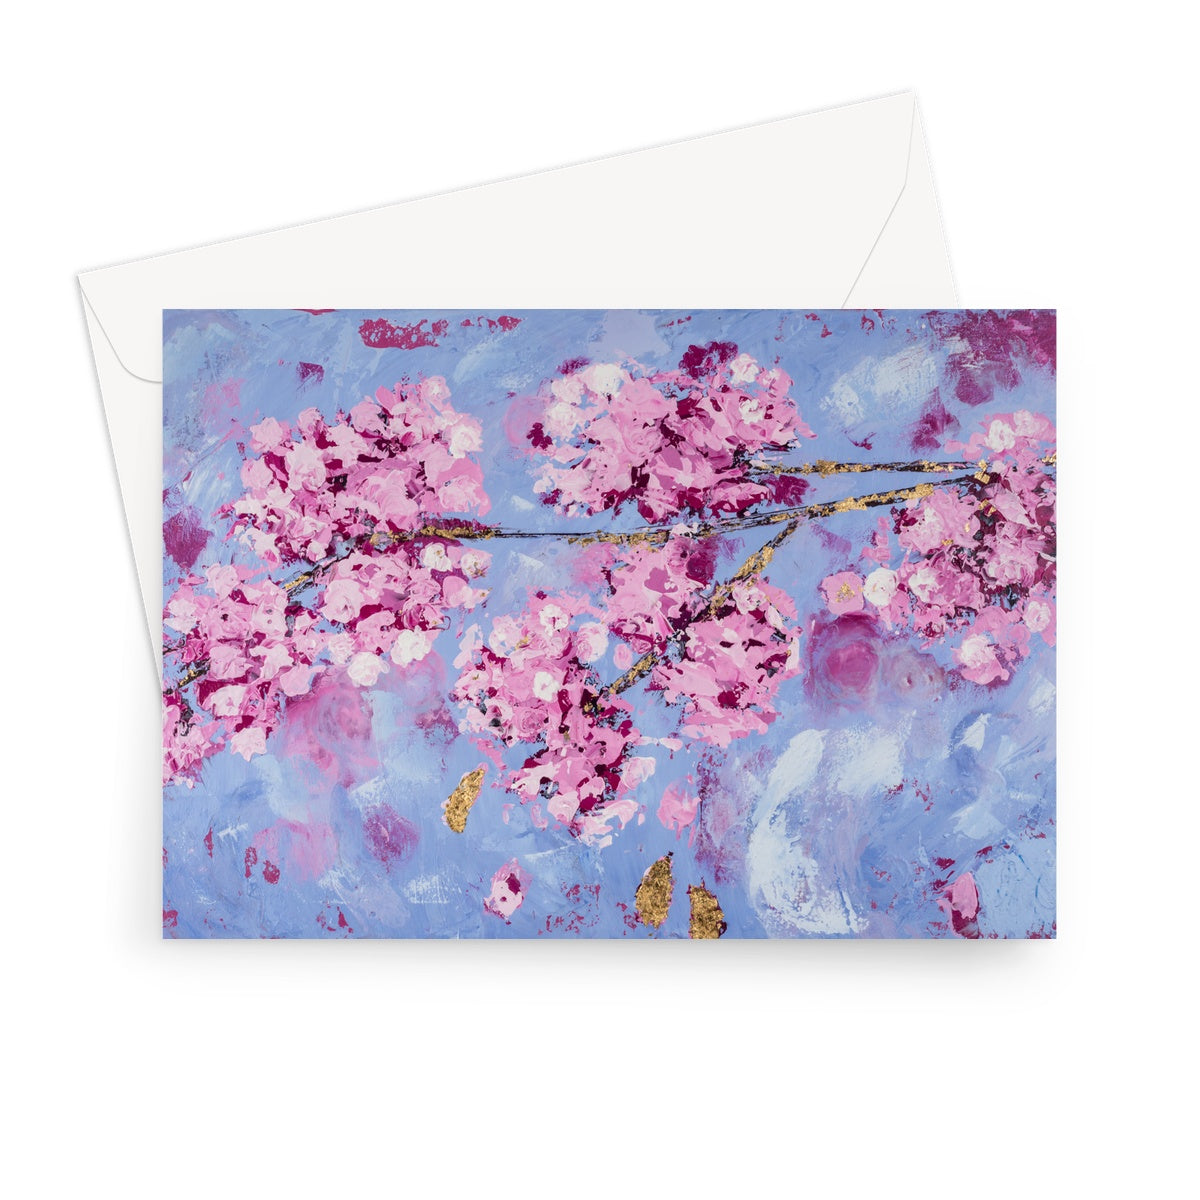 The Joy of Spring Greeting Card